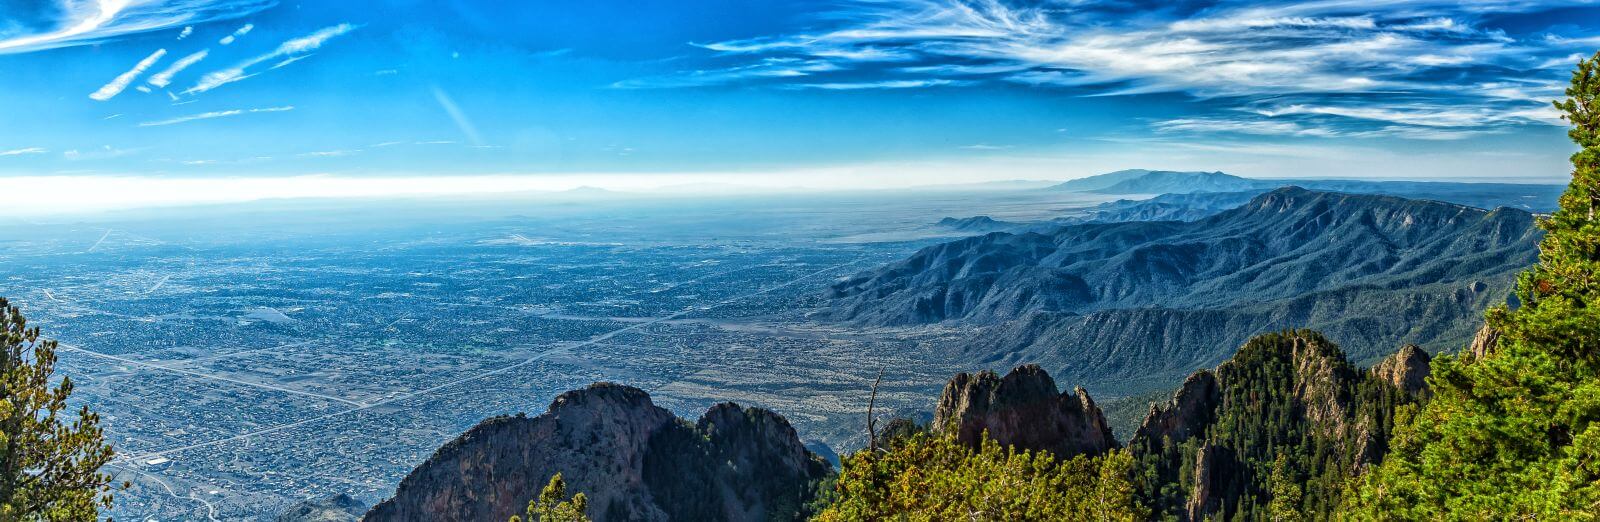 things to do in albuquerque